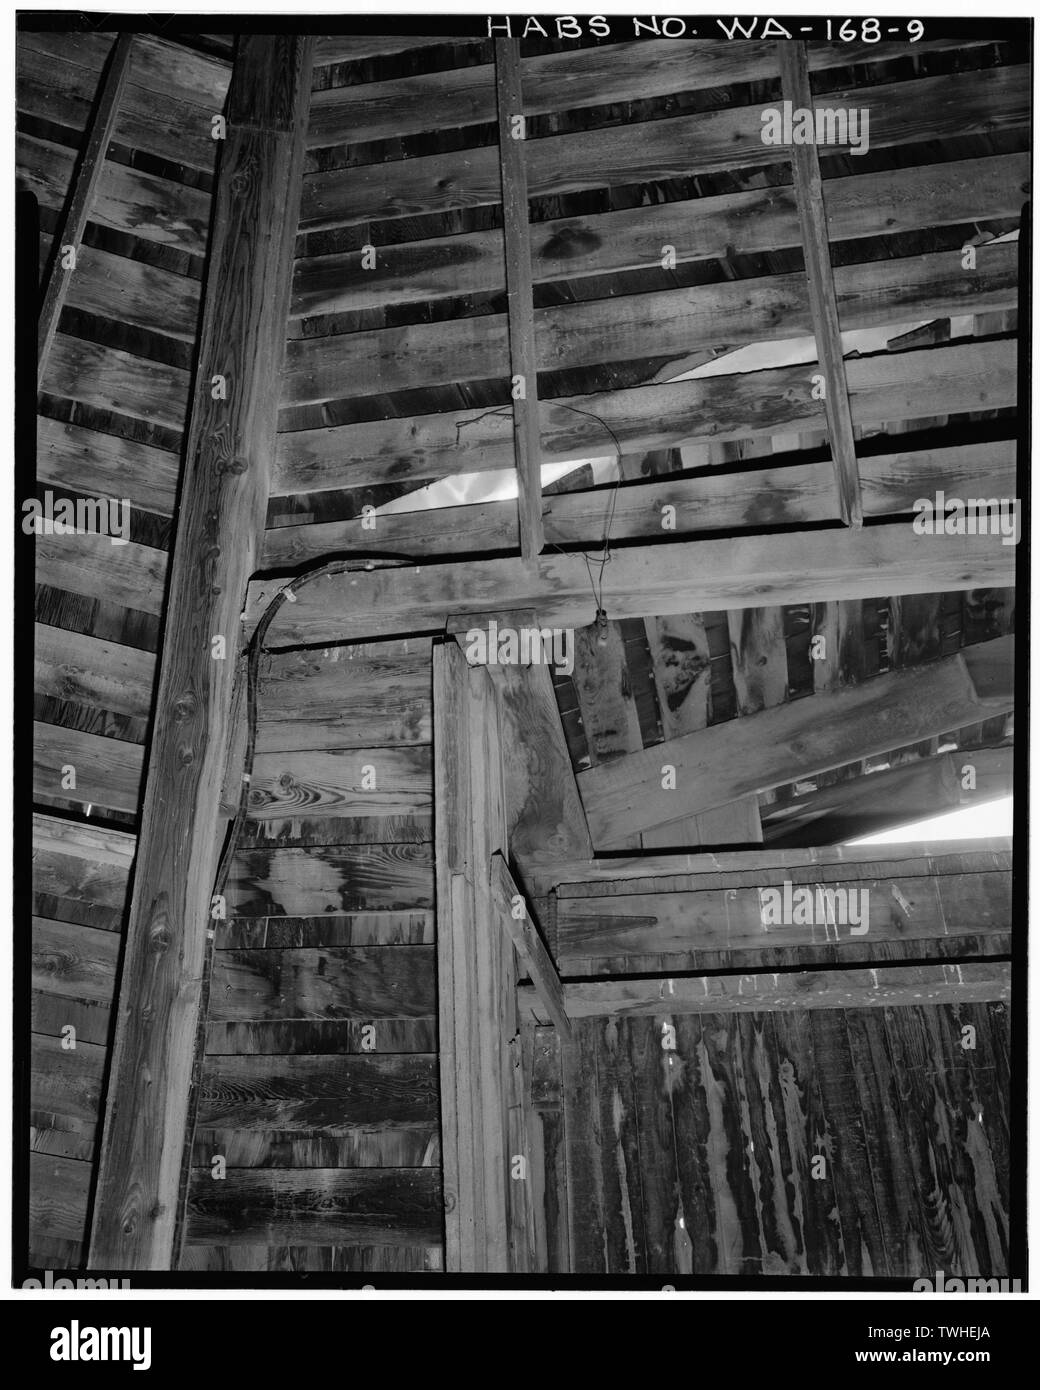 SECOND FLOOR INTERIOR, DORMER AND ROOF JOINERY, VERTICAL COMPOSITION - T. A. Leonard Barn, Old Moscow Highway, Pullman, Whitman County, WA; Cline, James H; Rudd, J William, project manager; Washington State University, School of Architecture, sponsor; Nys, Steven Eric, delineator; Burger, David M, delineator Stock Photo